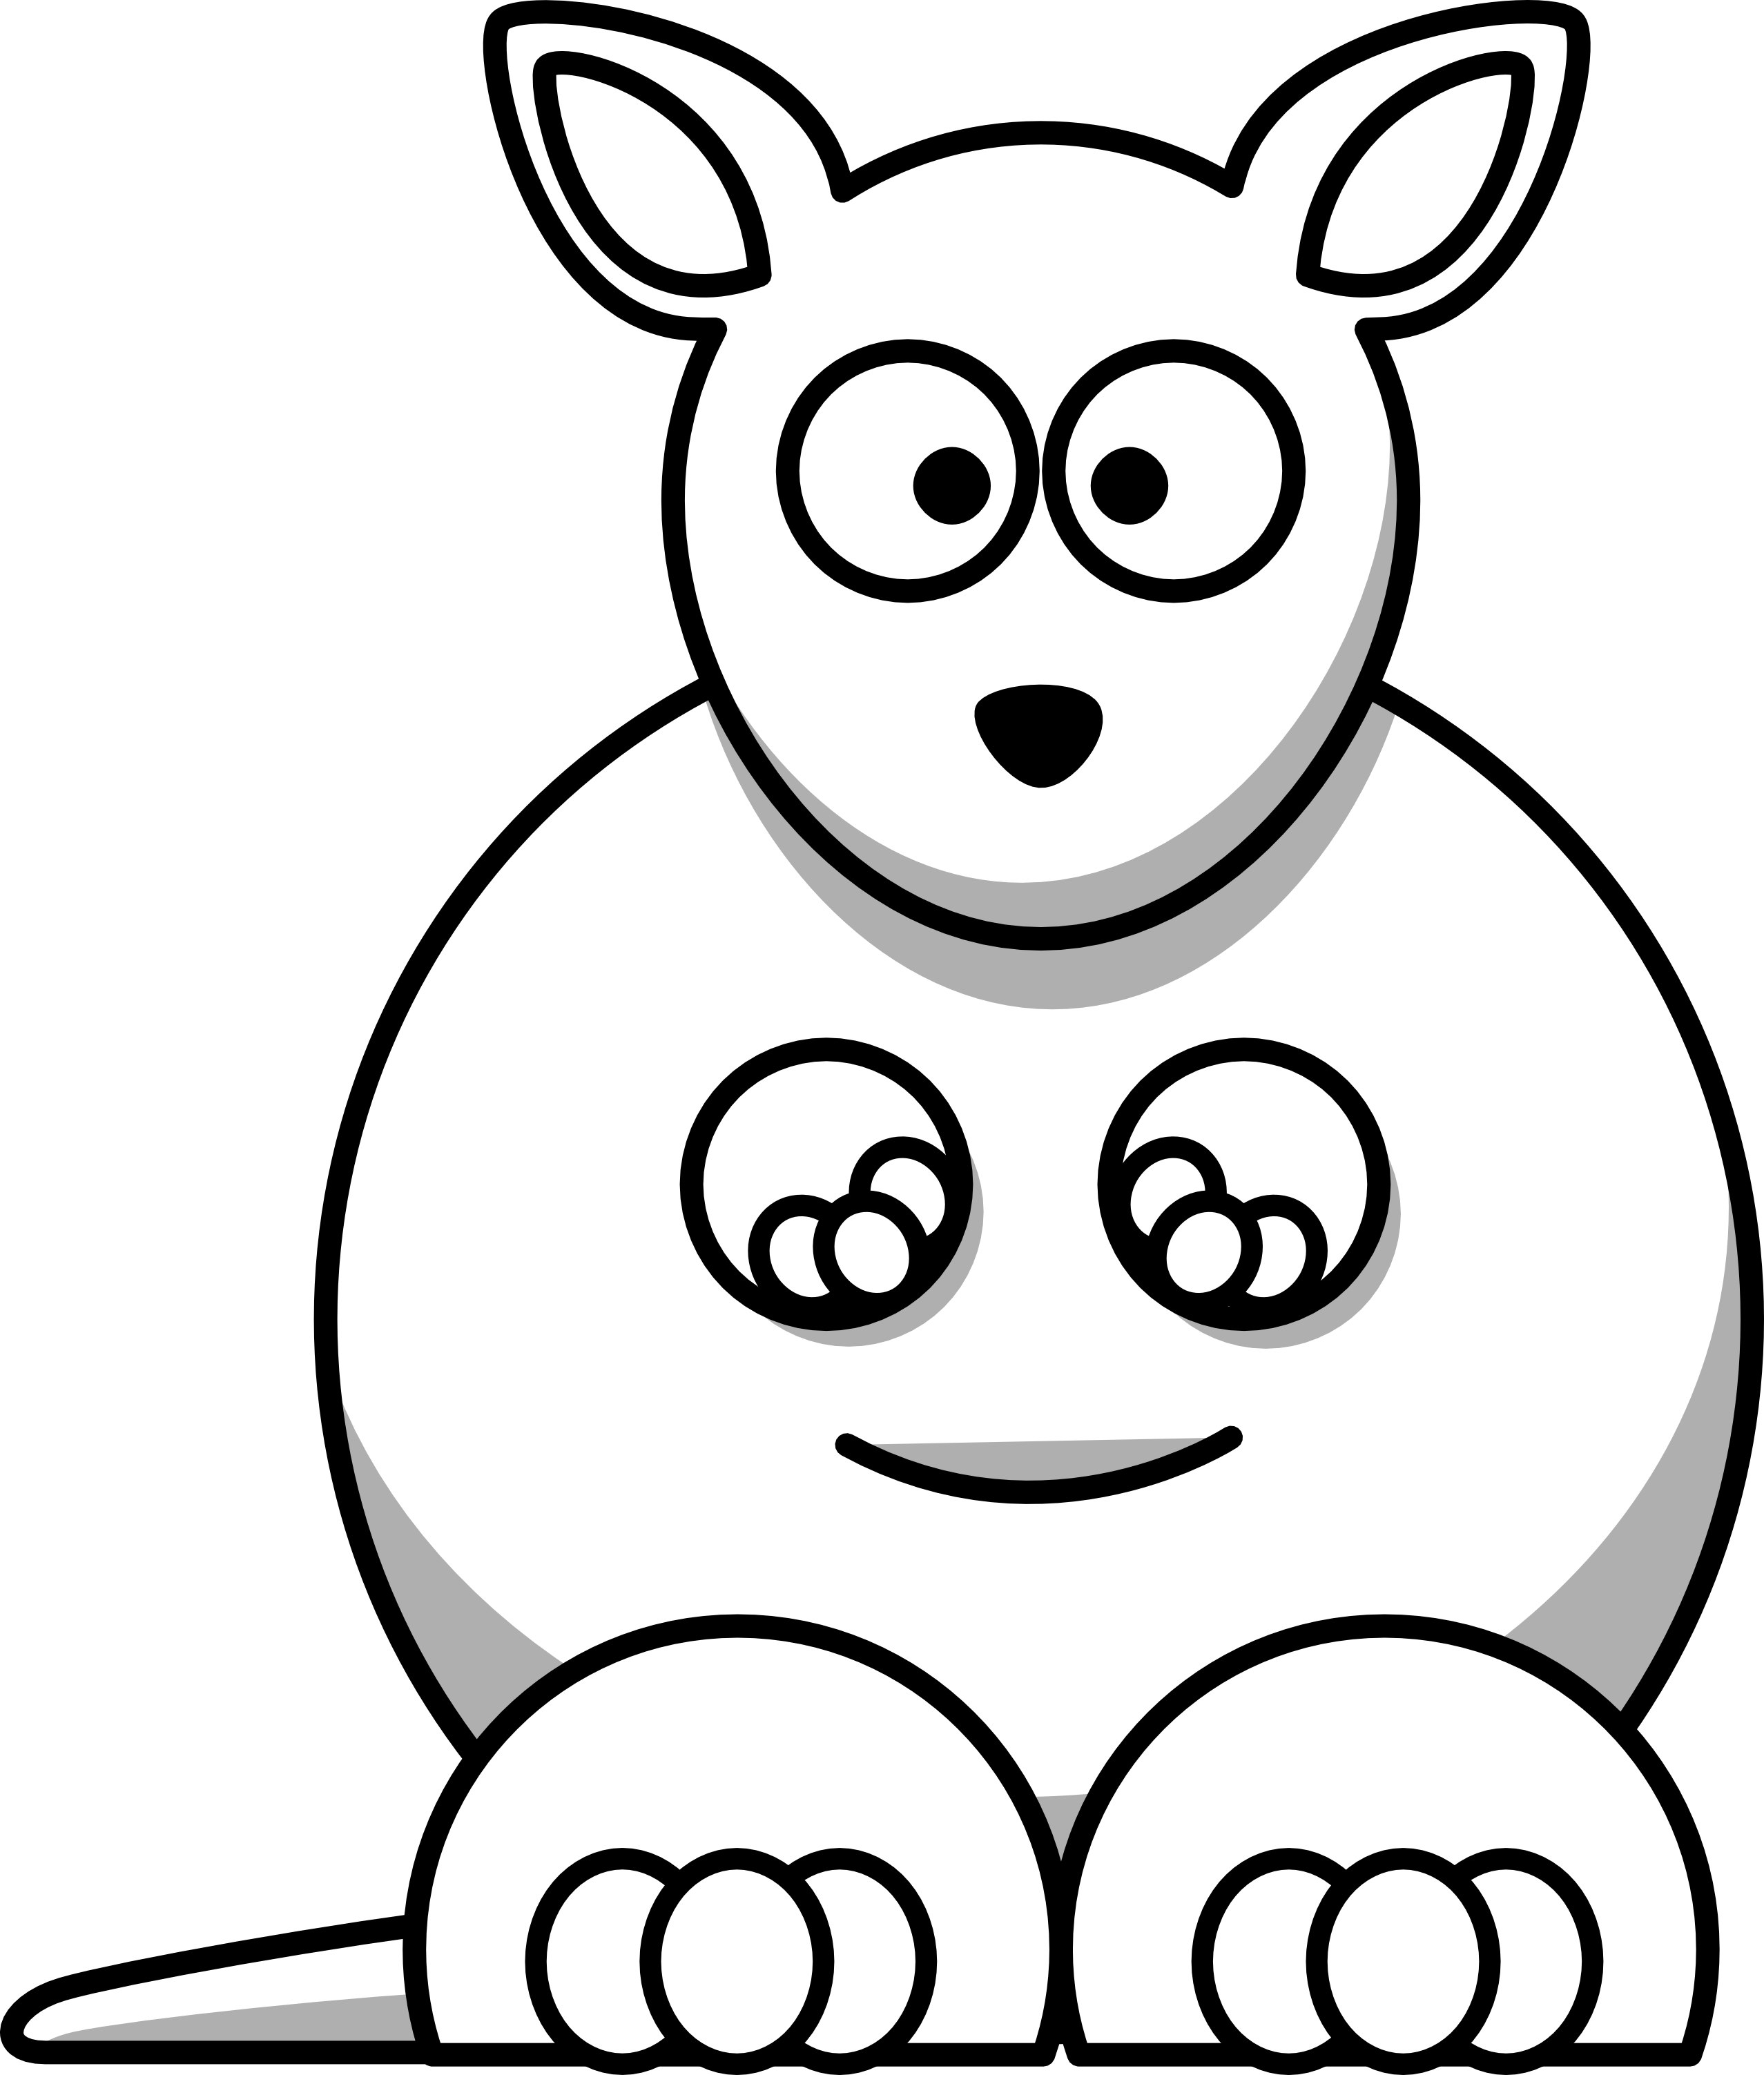 Black And White Cartoon Animals - Clipart library